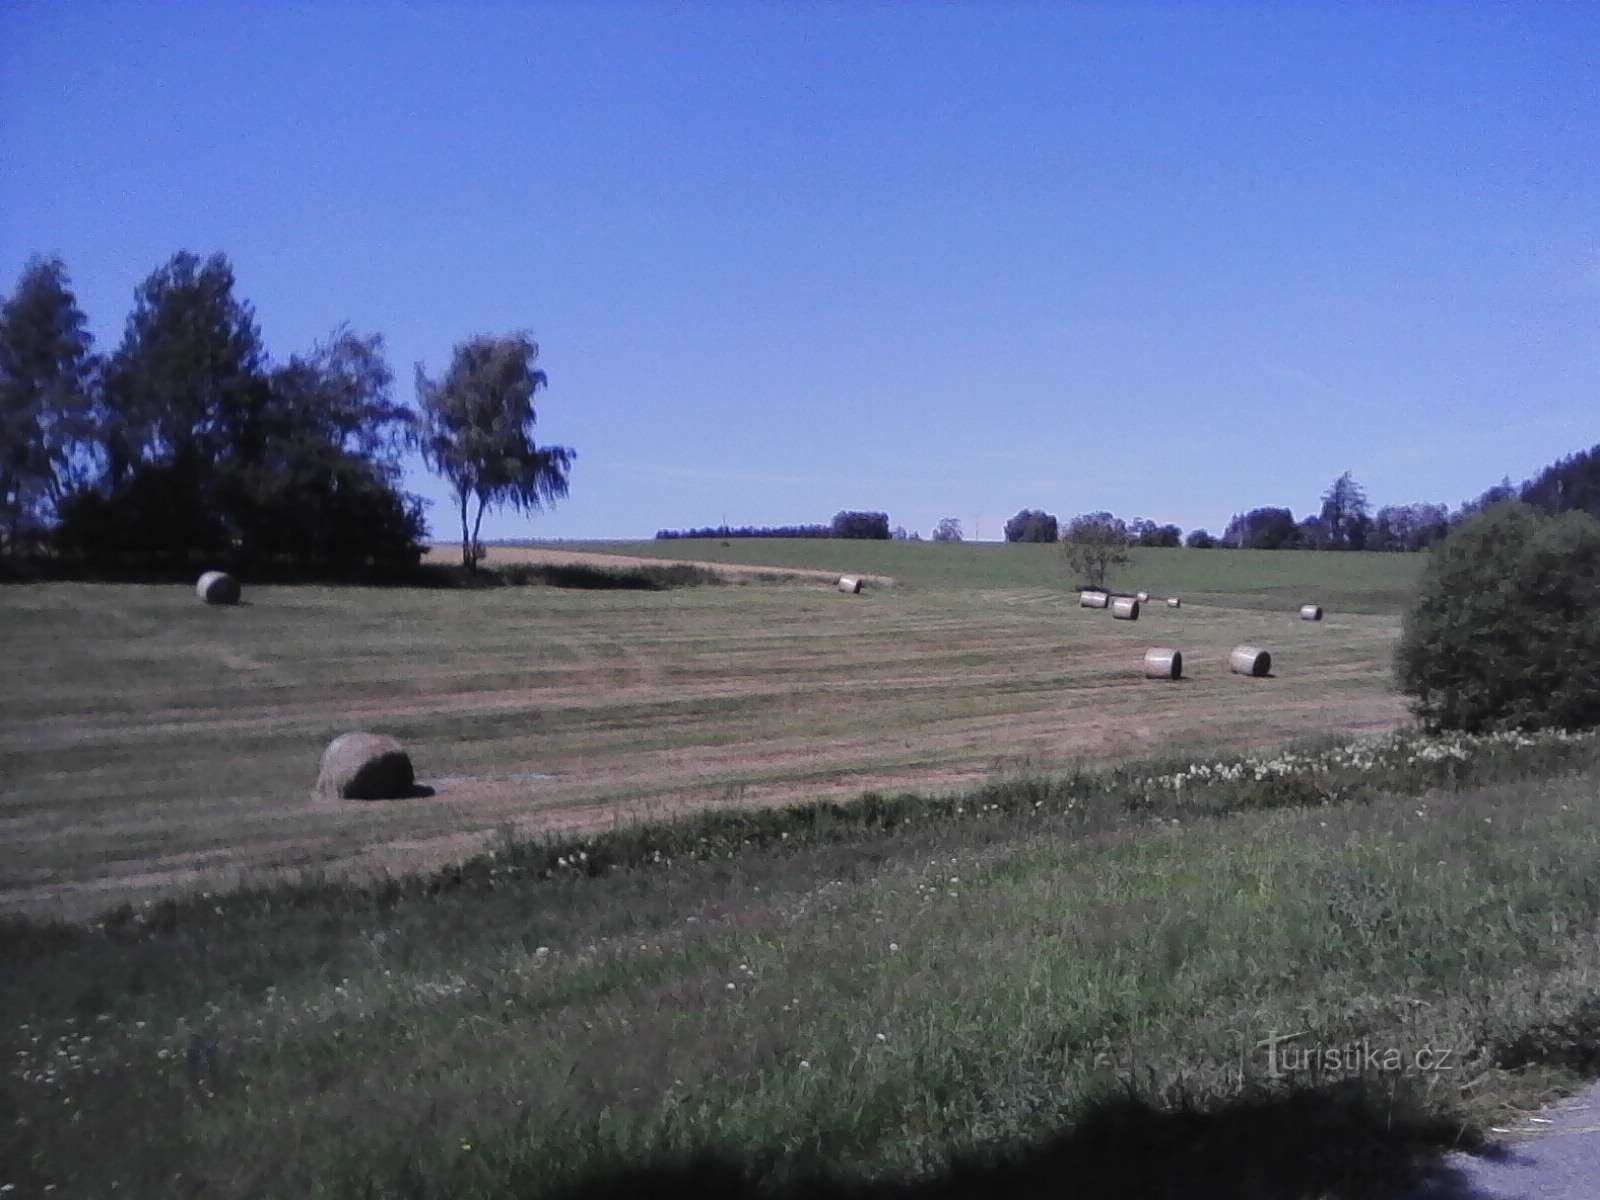 2. The hay is already harvested.